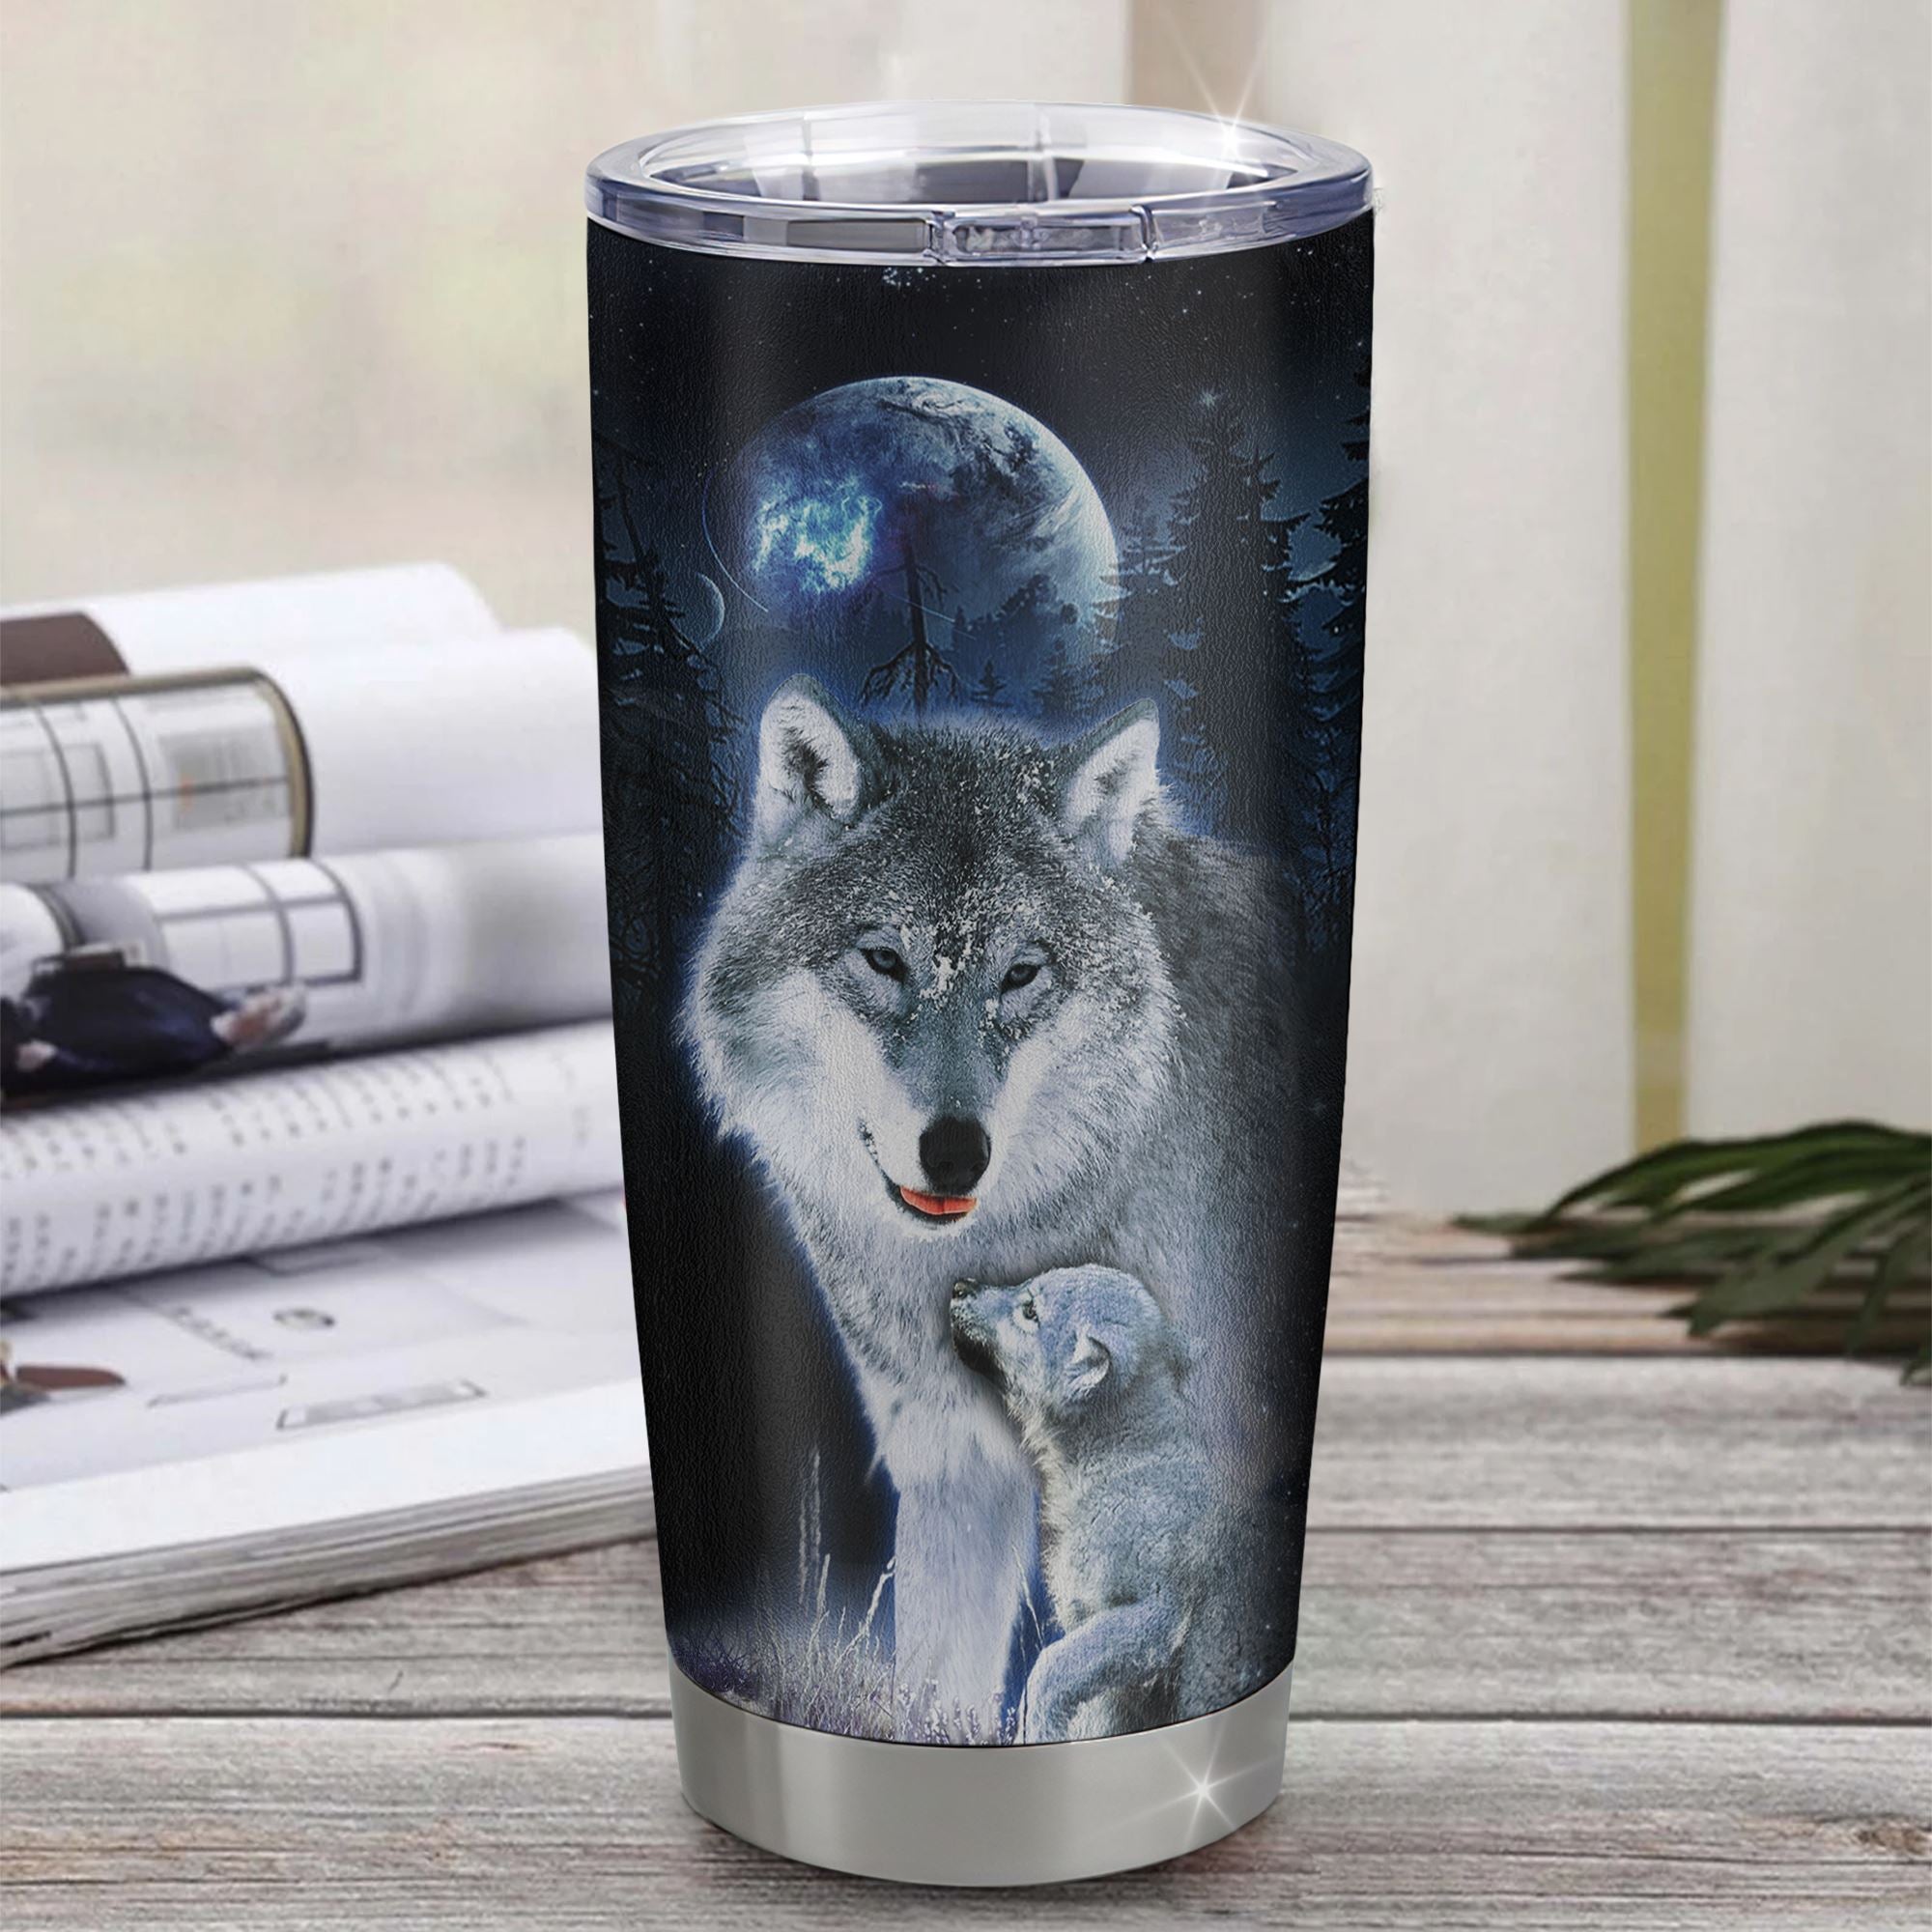 Personalized_To_My_Nephew_Wolf_Tumbler_From_Aunt_Uncle_Auntie_Stainless_Steel_Cup_Always_Remember_Nephew_Birthday_Graduation_Christmas_Travel_Mug_Tumbler_mockup_1.jpg